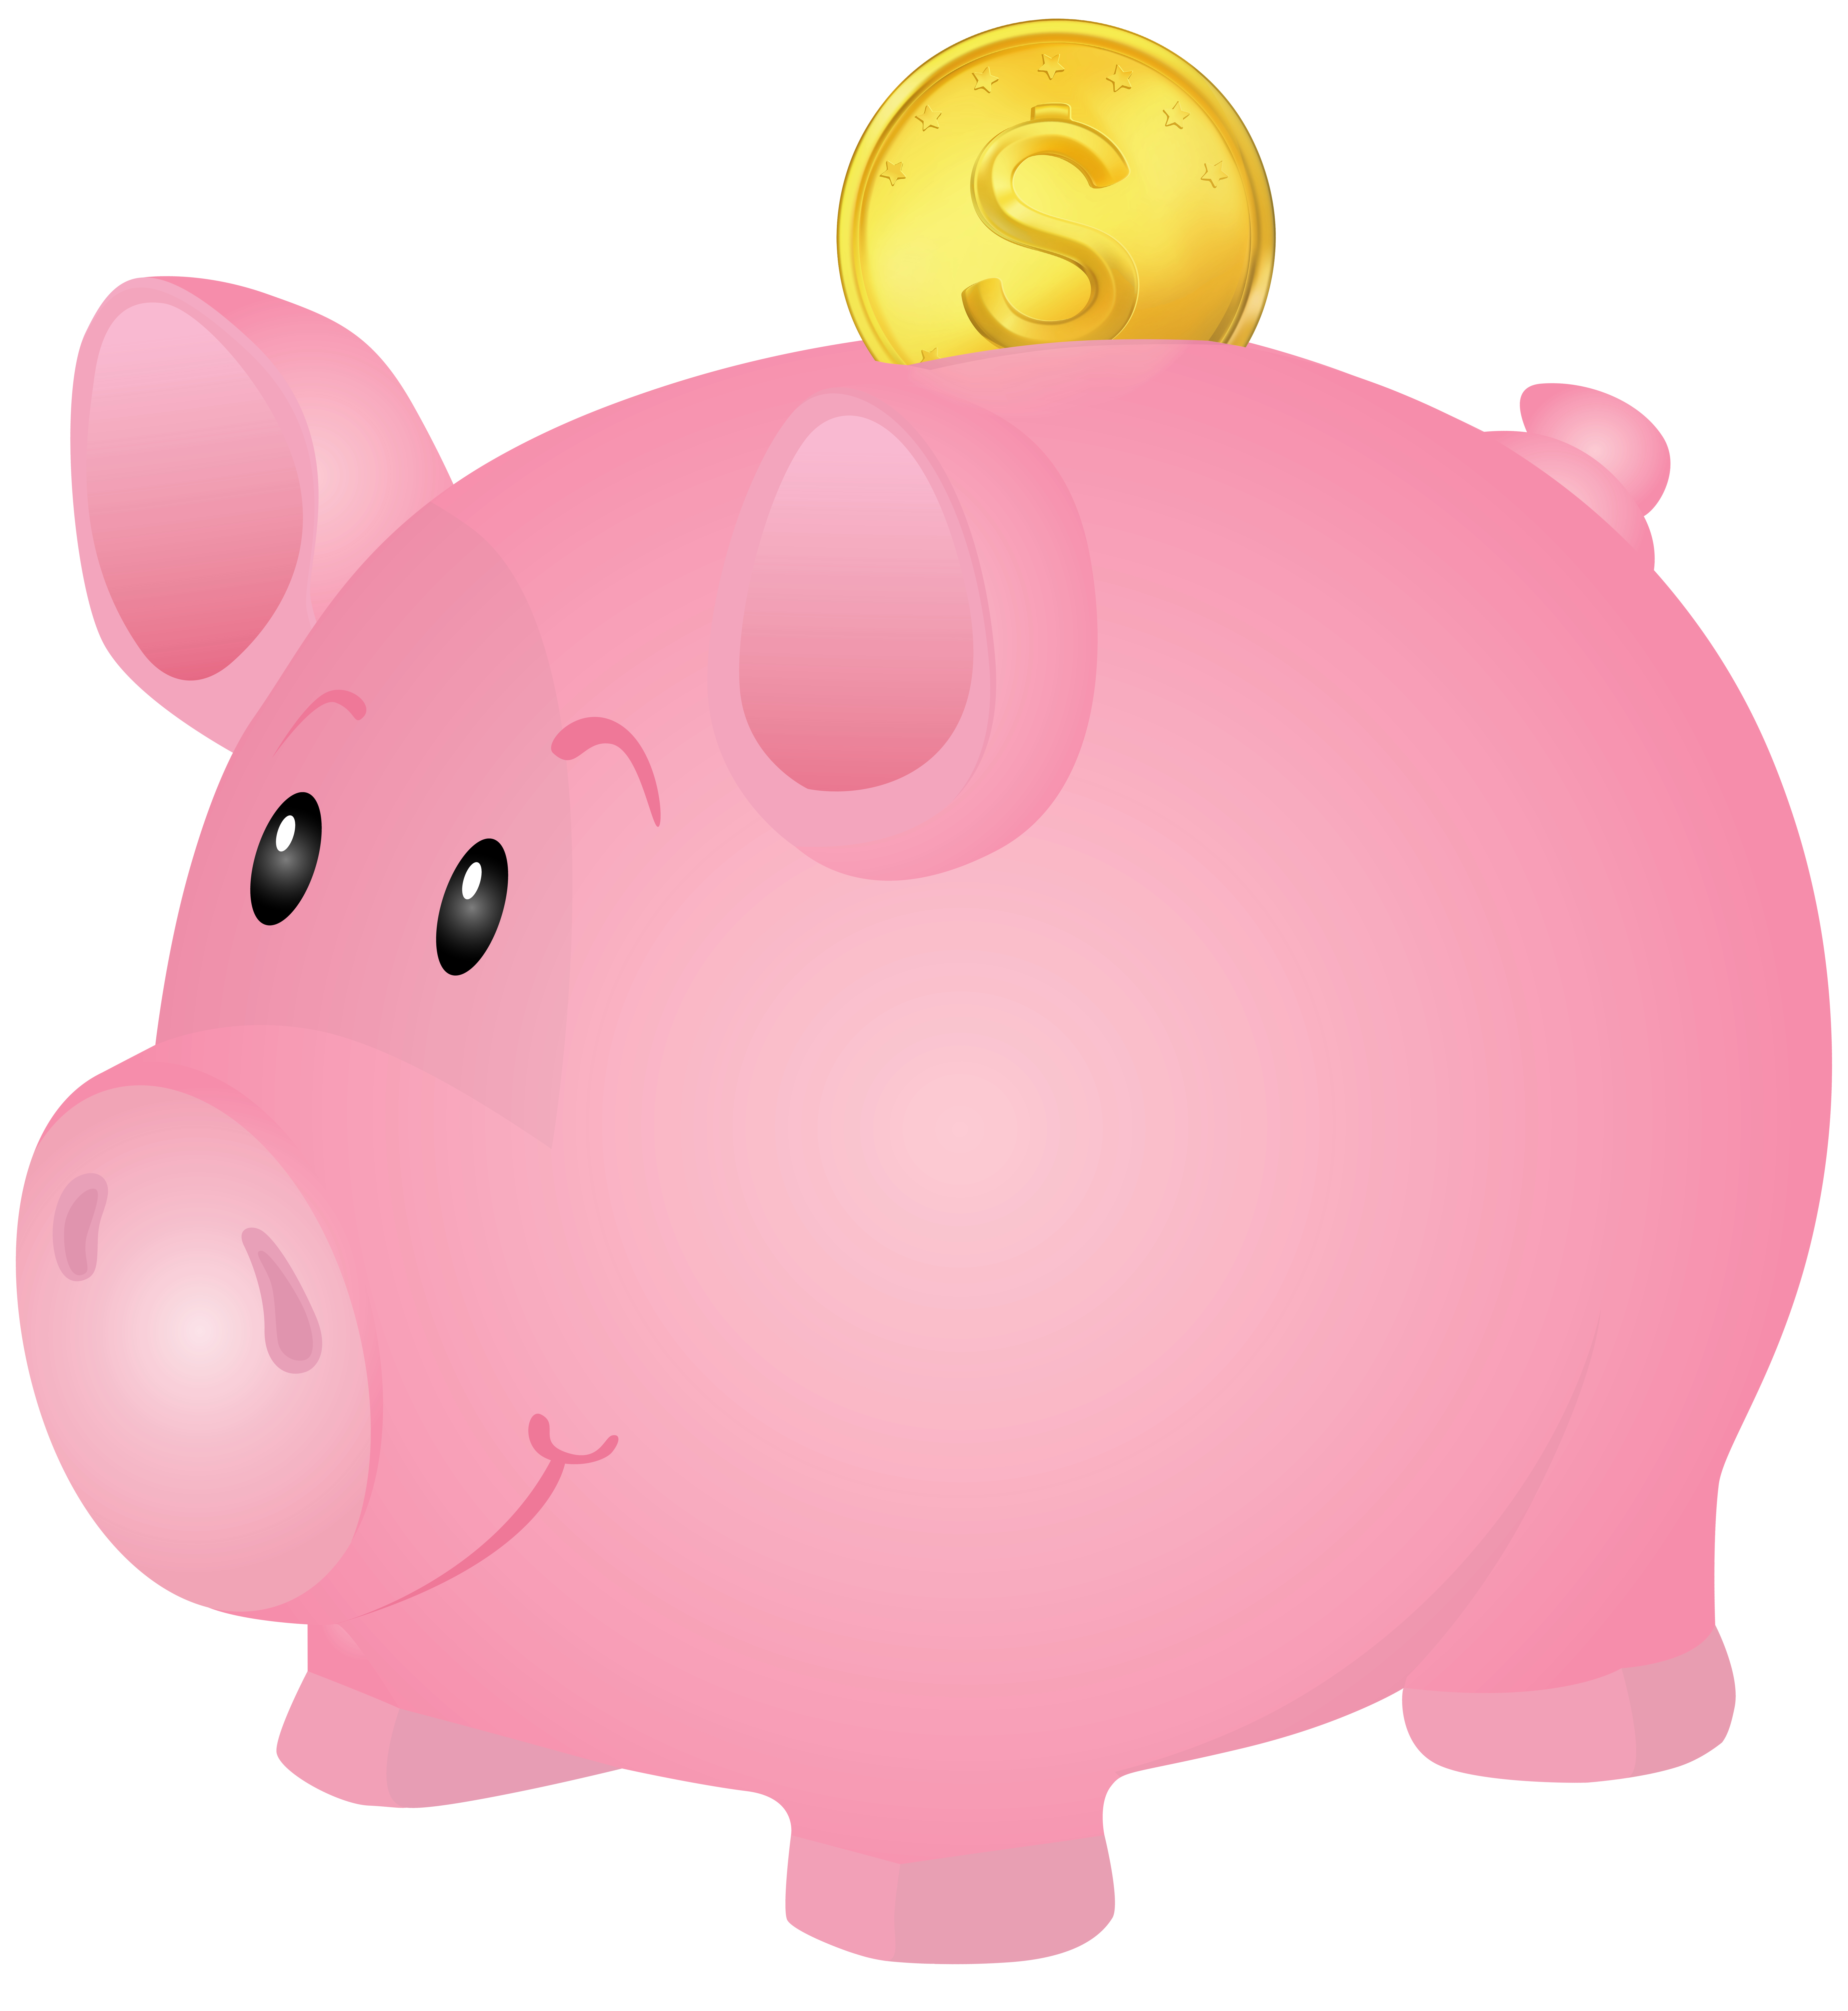 Piggy Bank PNG Transparent Clipart​ | Gallery Yopriceville - High-Quality  Free Images and Transparent PNG Clipart